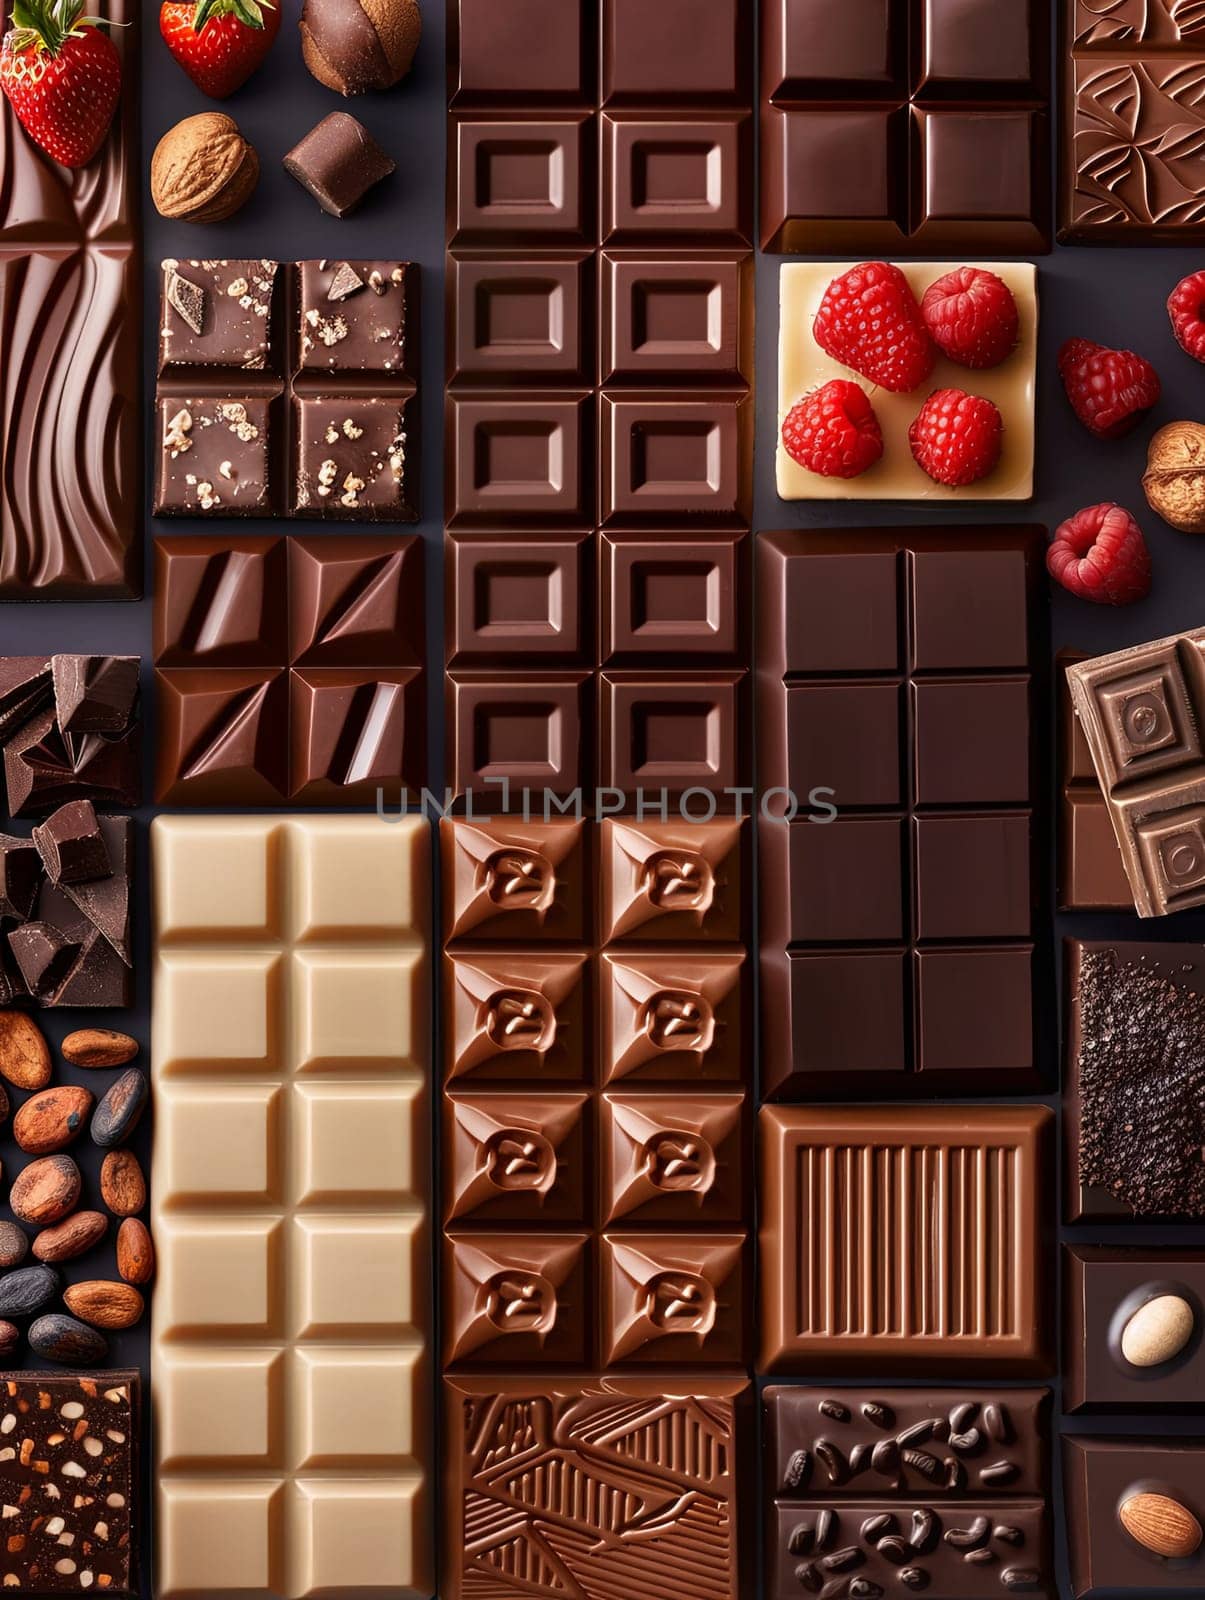 A collage featuring various chocolate bars, nuts, and raspberries neatly arranged.